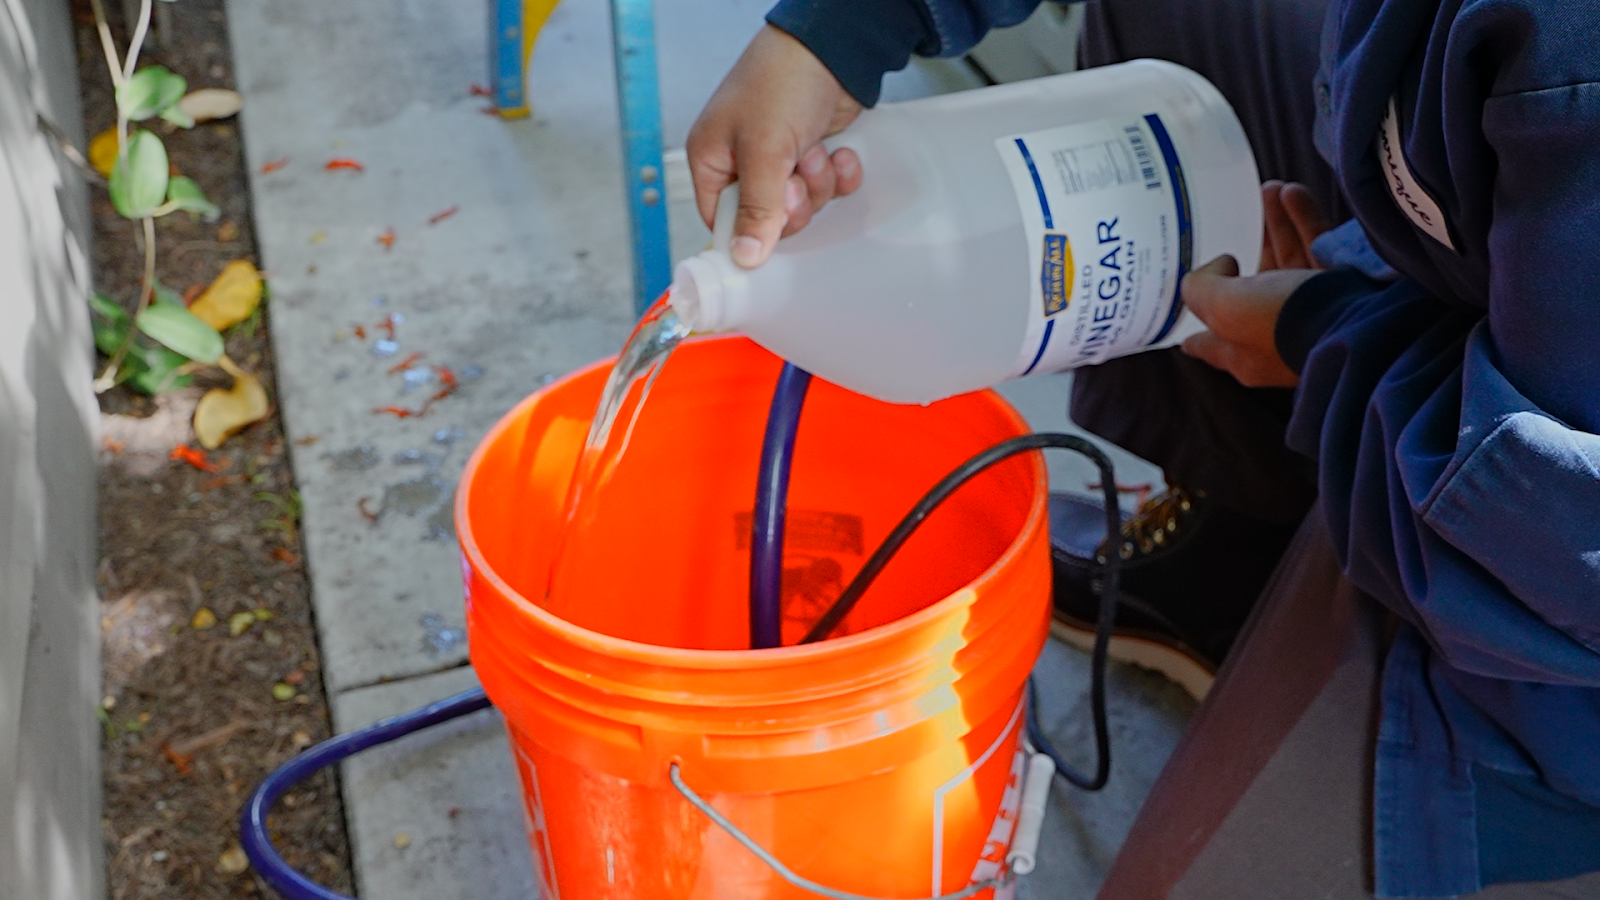 The image shows a Monkey Wrench Plumbing, Heating & Air technician pouring white vinegar into an orange 5-gallon bucket.